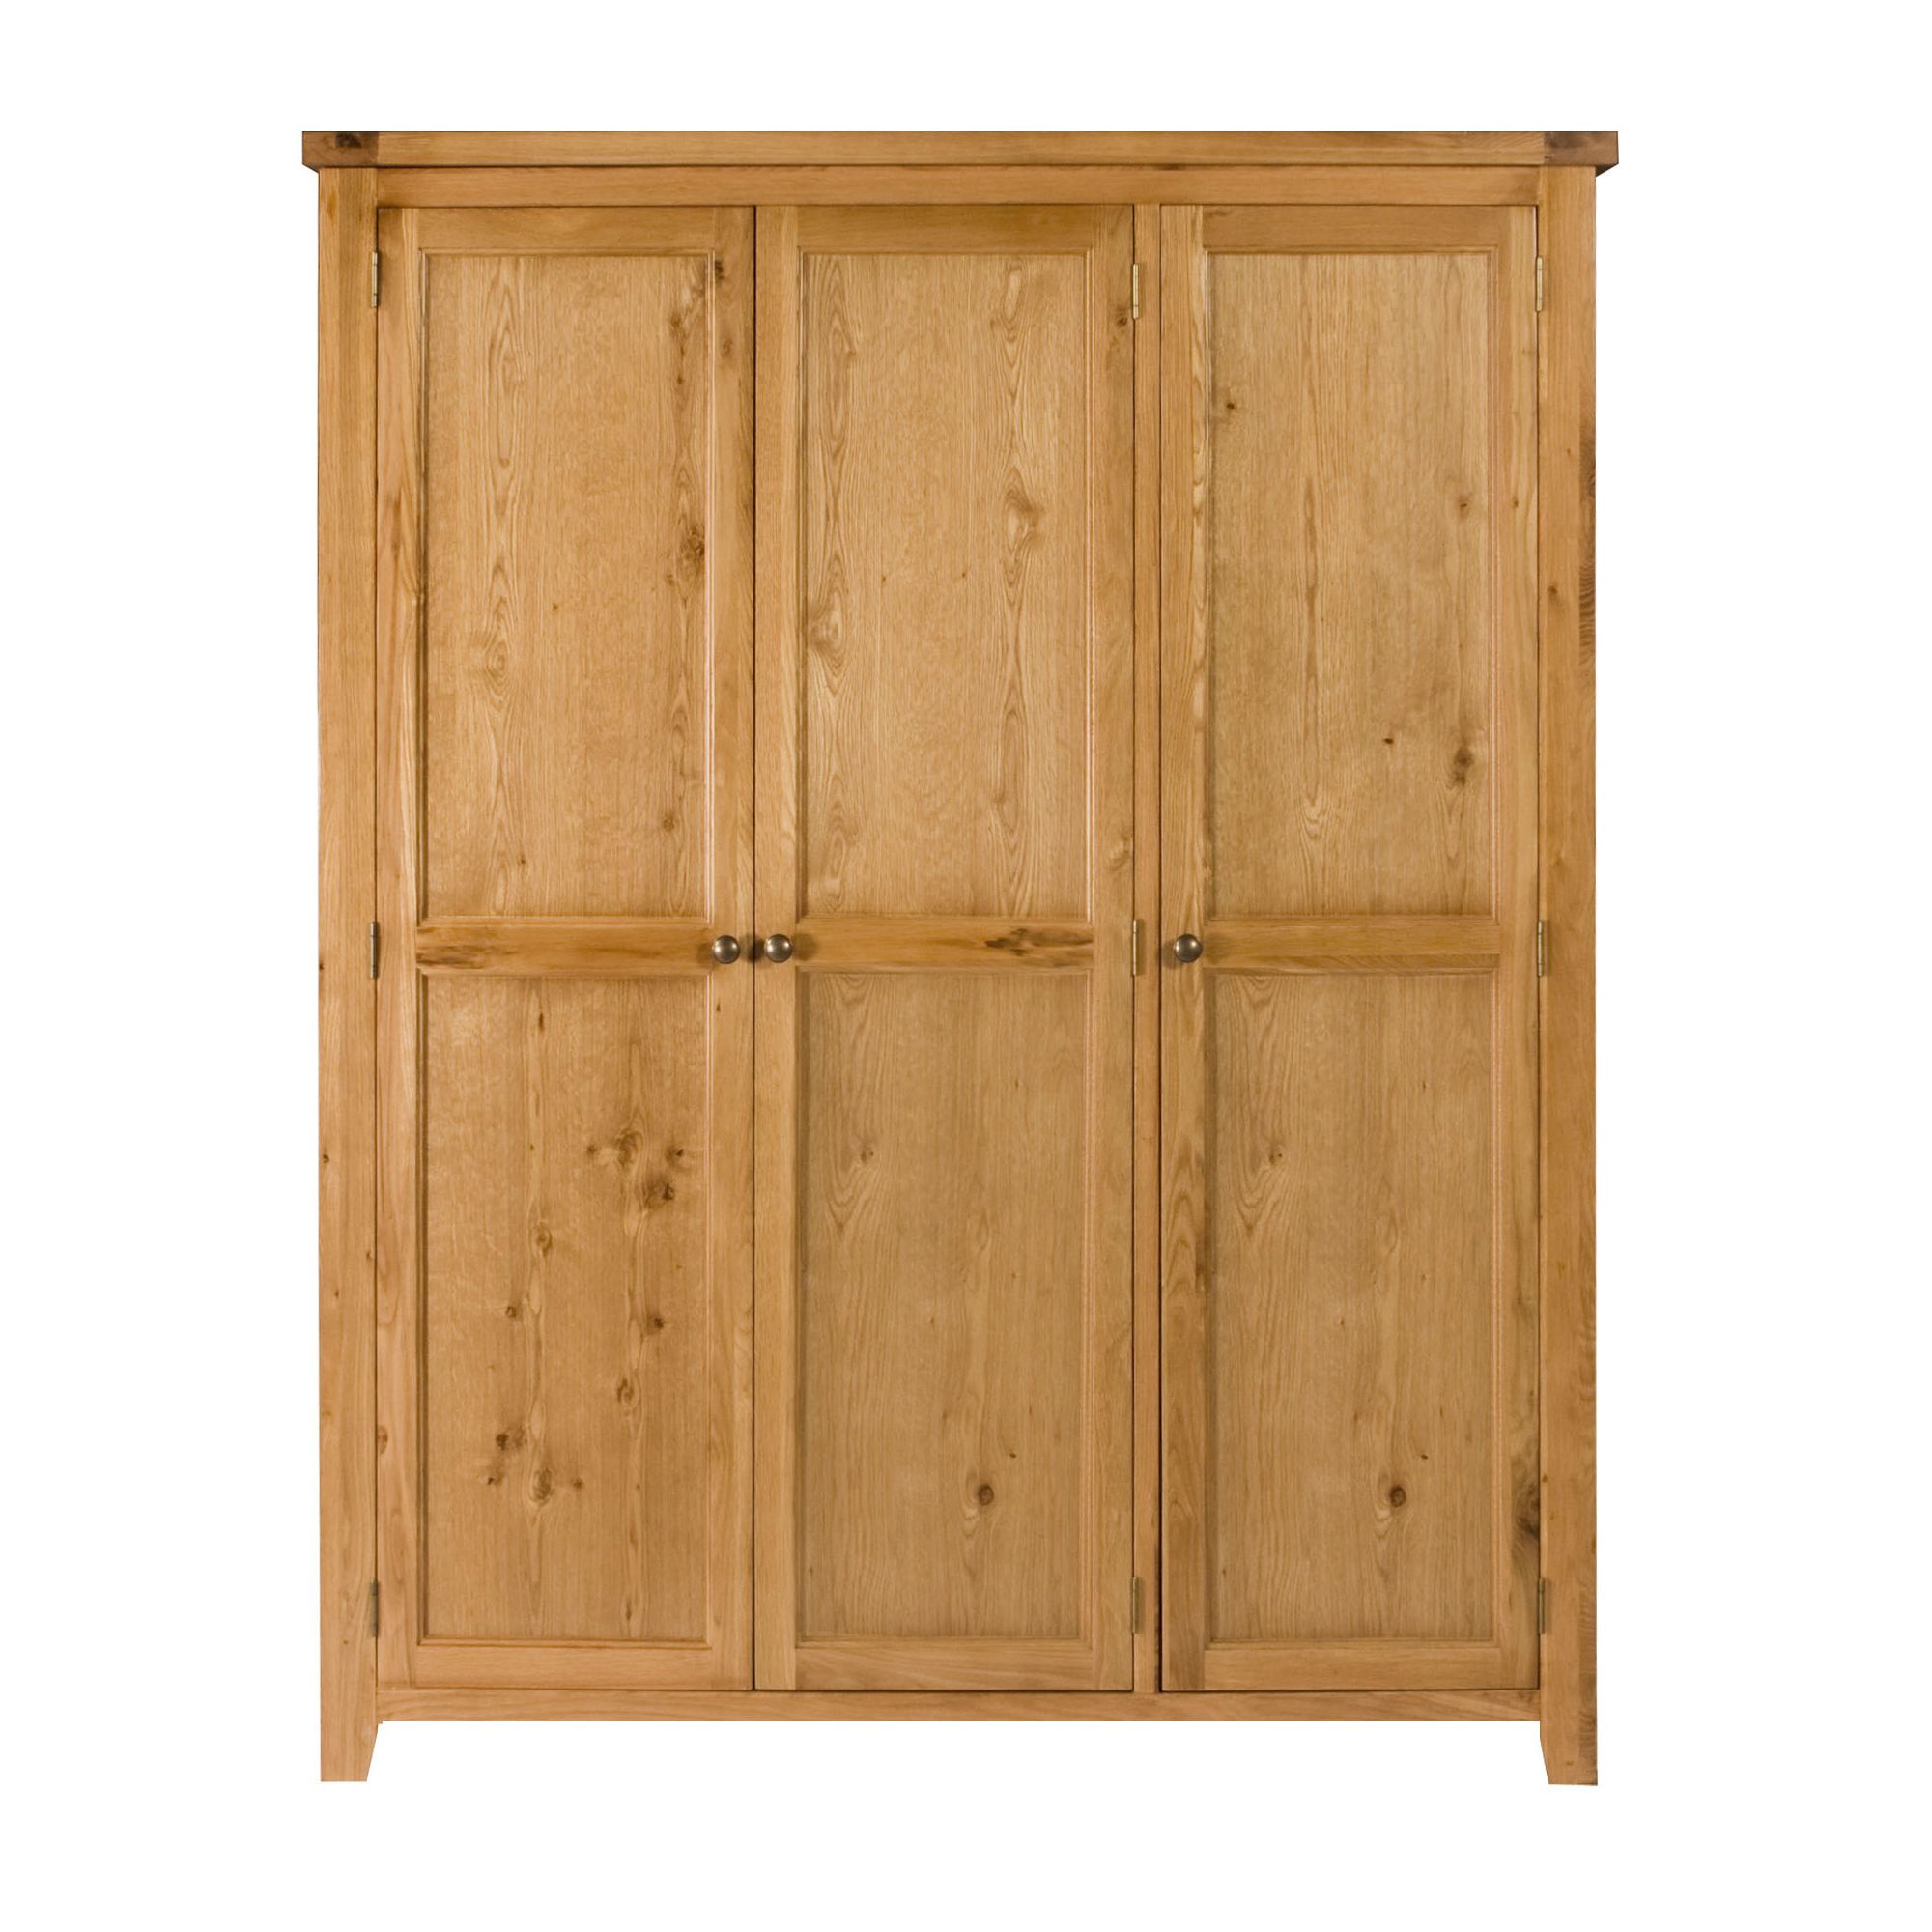 Elements Brunswick Bedroom Three Door All Hanging Wardrobe in Warm Lacquer at Tesco Direct